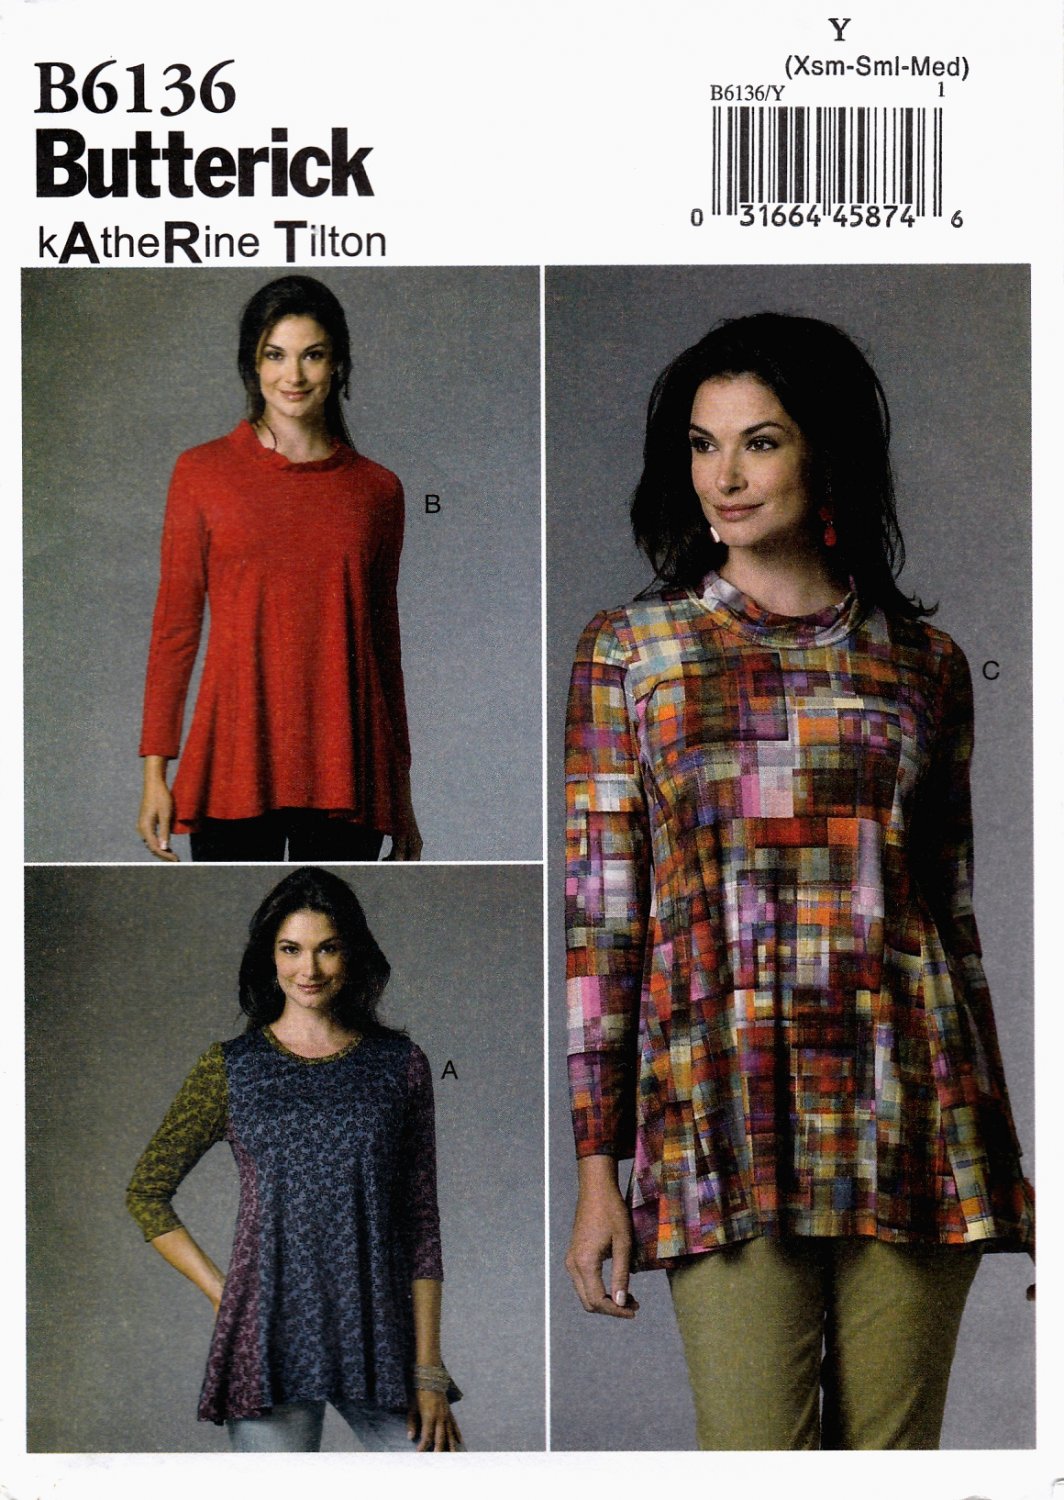 Butterick B6136 Misses Tunics Pullover Long Sleeves Sewing Pattern Sizes Xsm-Sml-Med